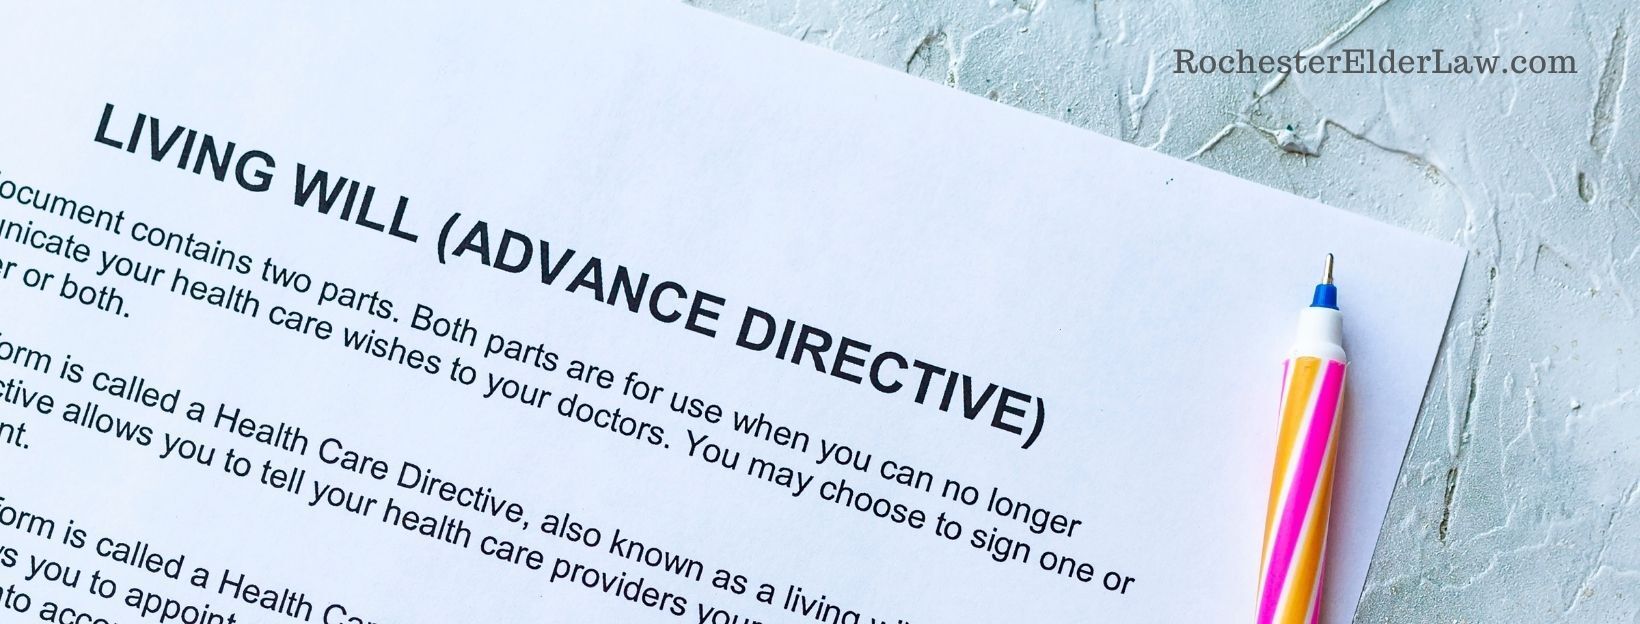 How COVID-19 is Changing Advance Directives